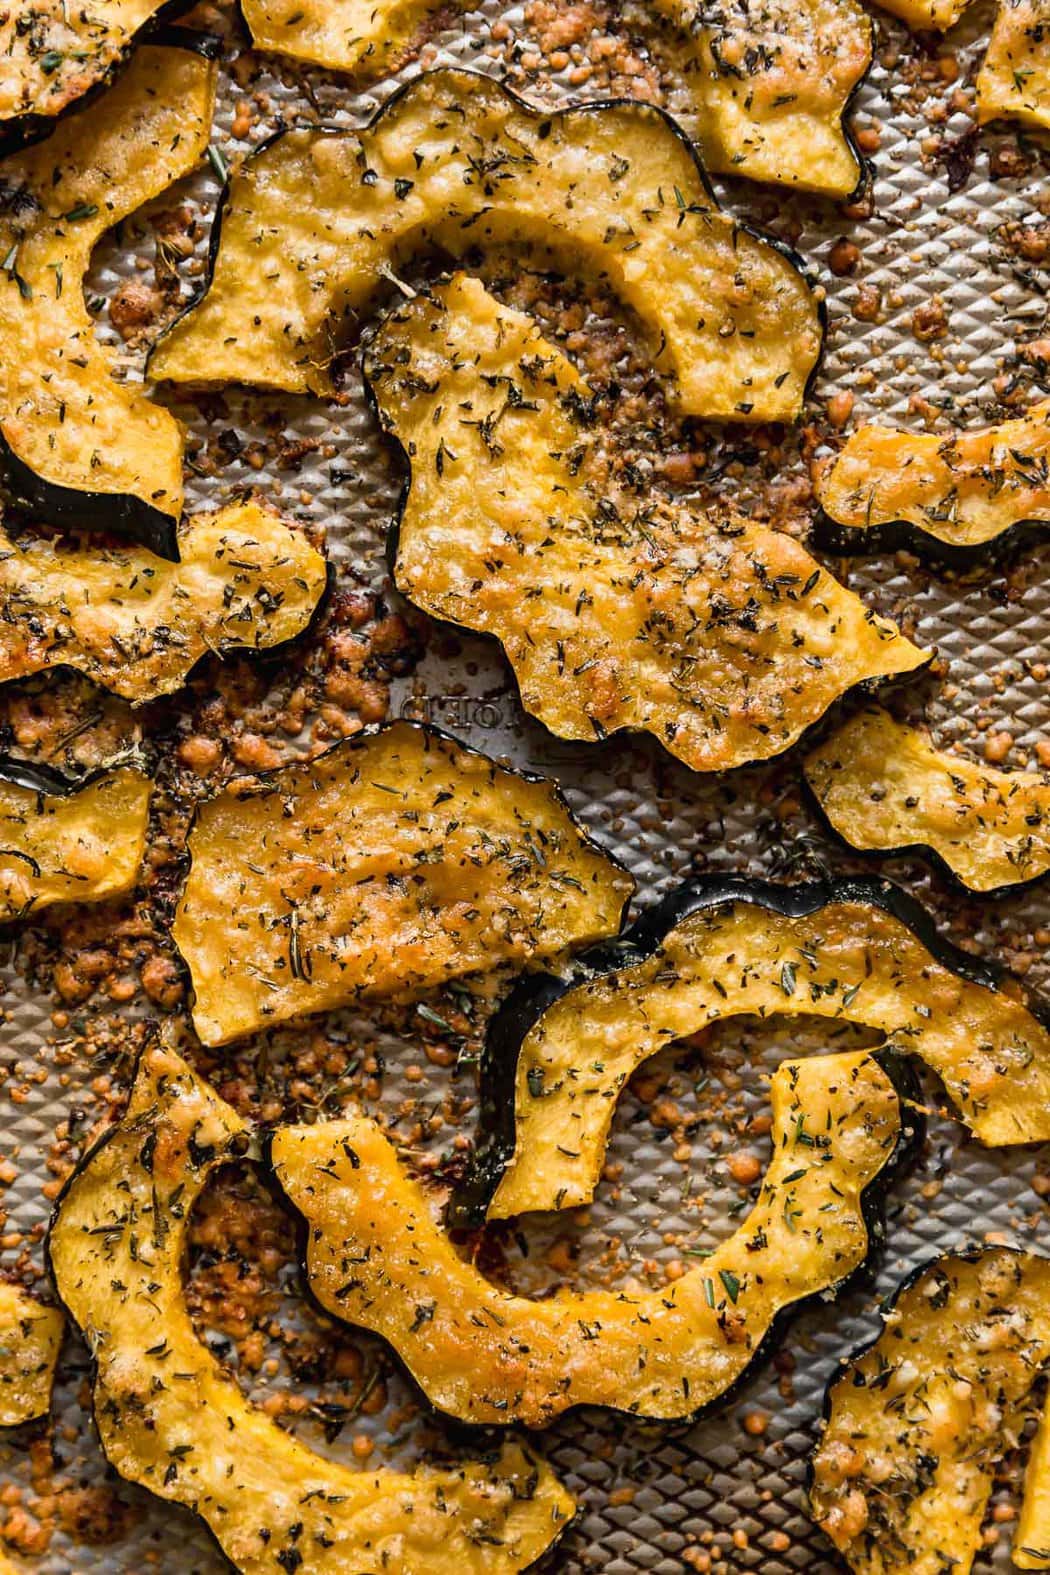 Parmesan crusted acorn squash recipe, close-up of finished pieces on baking pan